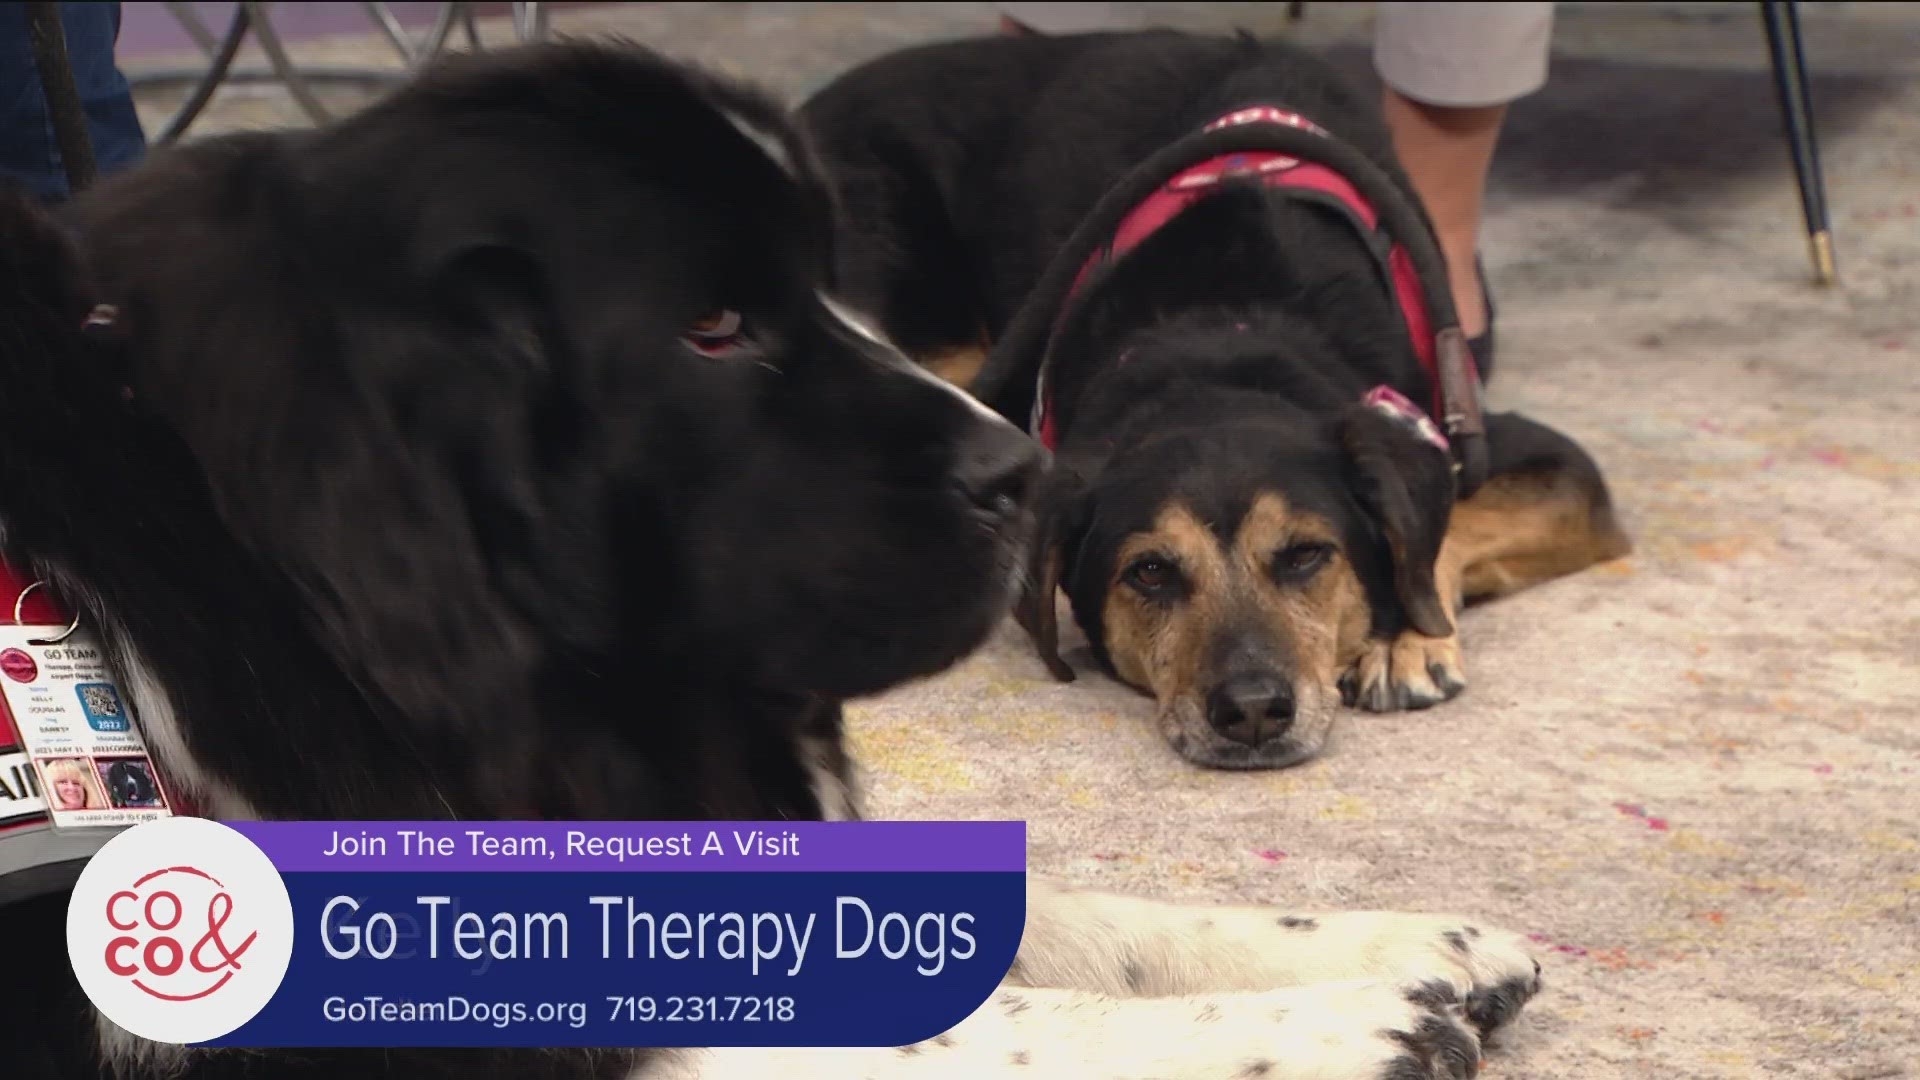 Support Go Team Therapy Dogs and attend a training weekend on June 3rd and 4th. Learn more and get started at GoTeamDogs.org.